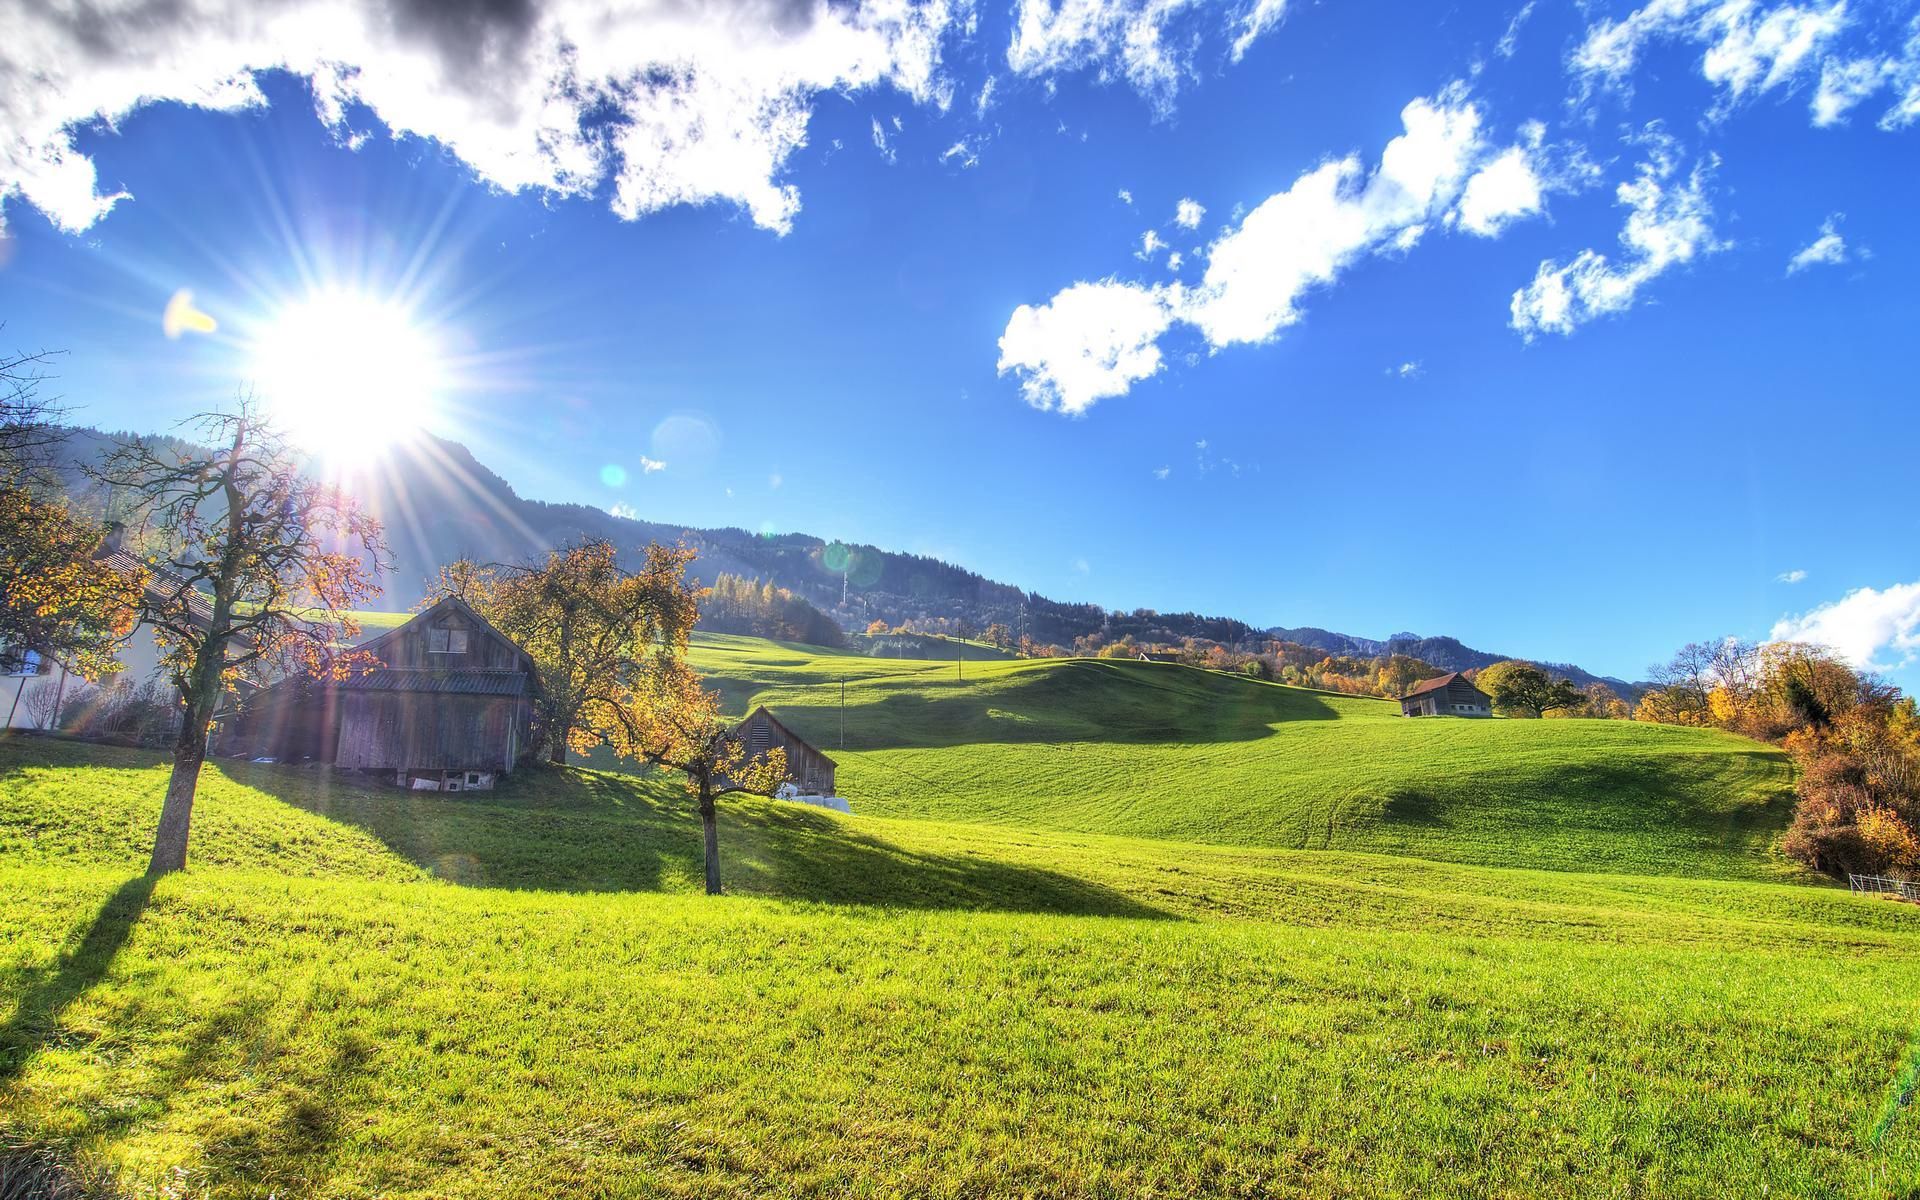 fields, lawn, warmth, small house, lodge, nature, shine, autumn, sun, light, beams, rays, heat, slopes, lawns, indian summer